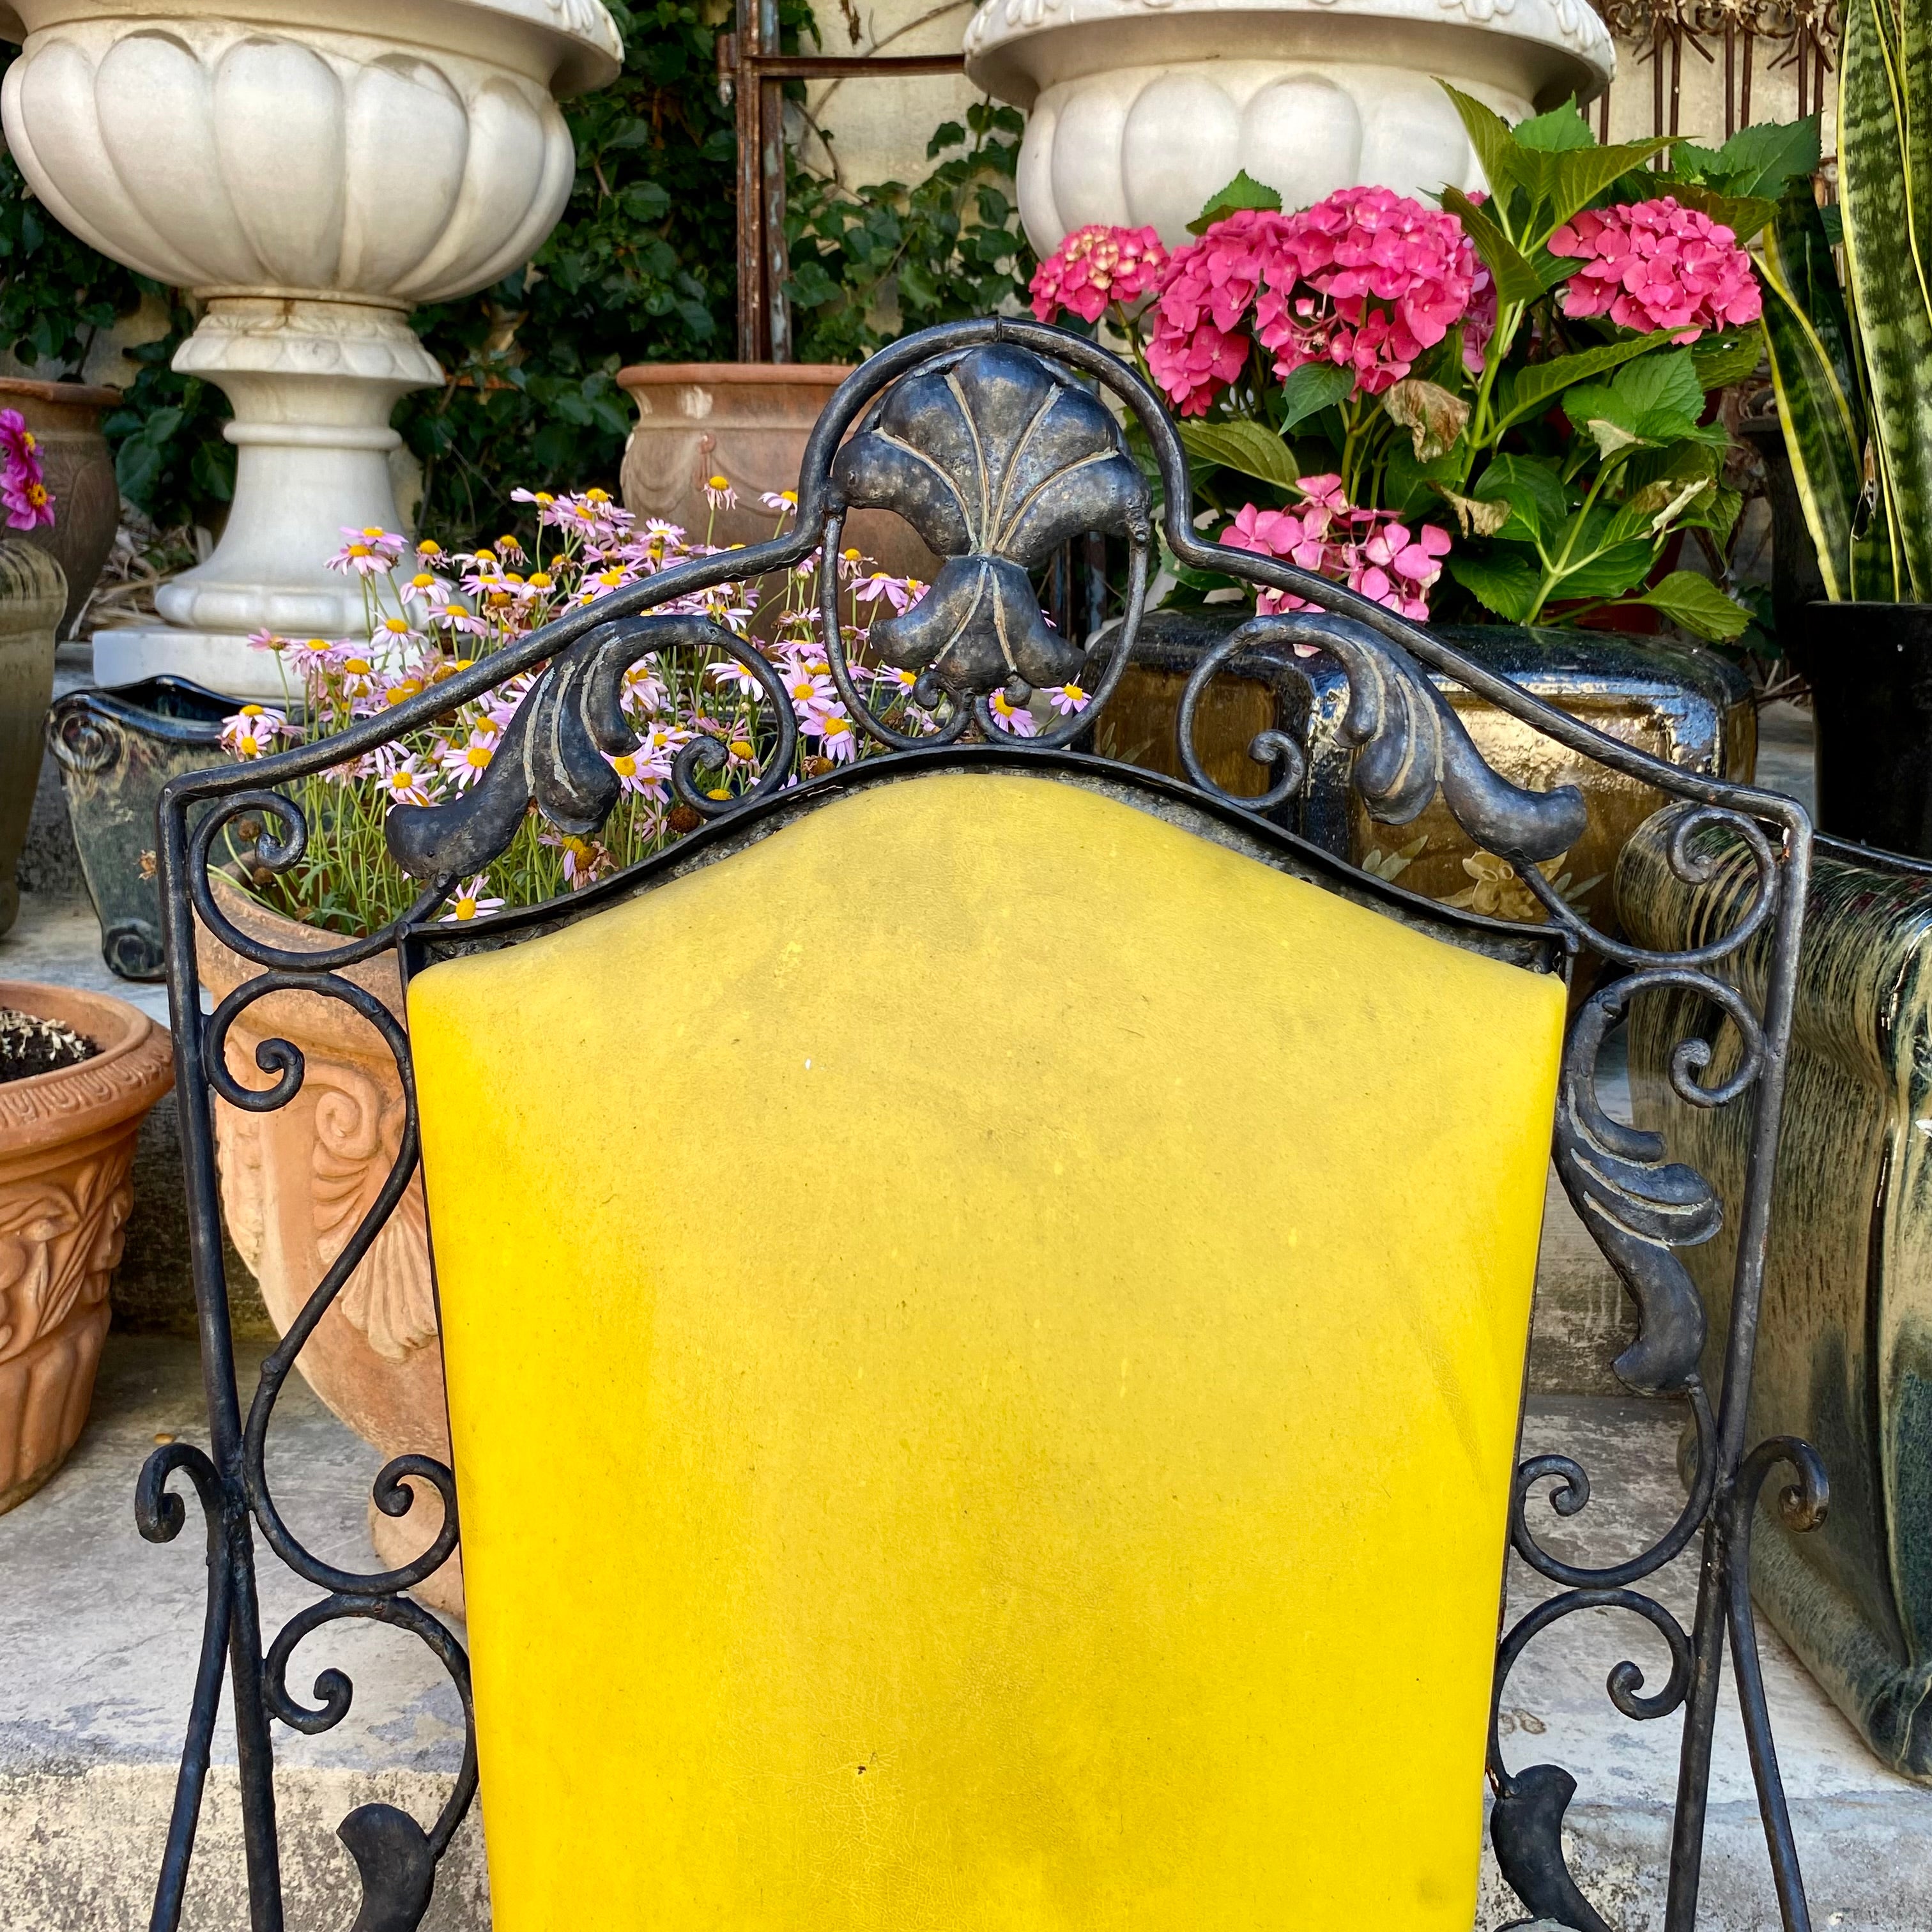 Rustic Wrought Iron Armchair with Yellow Upholstery